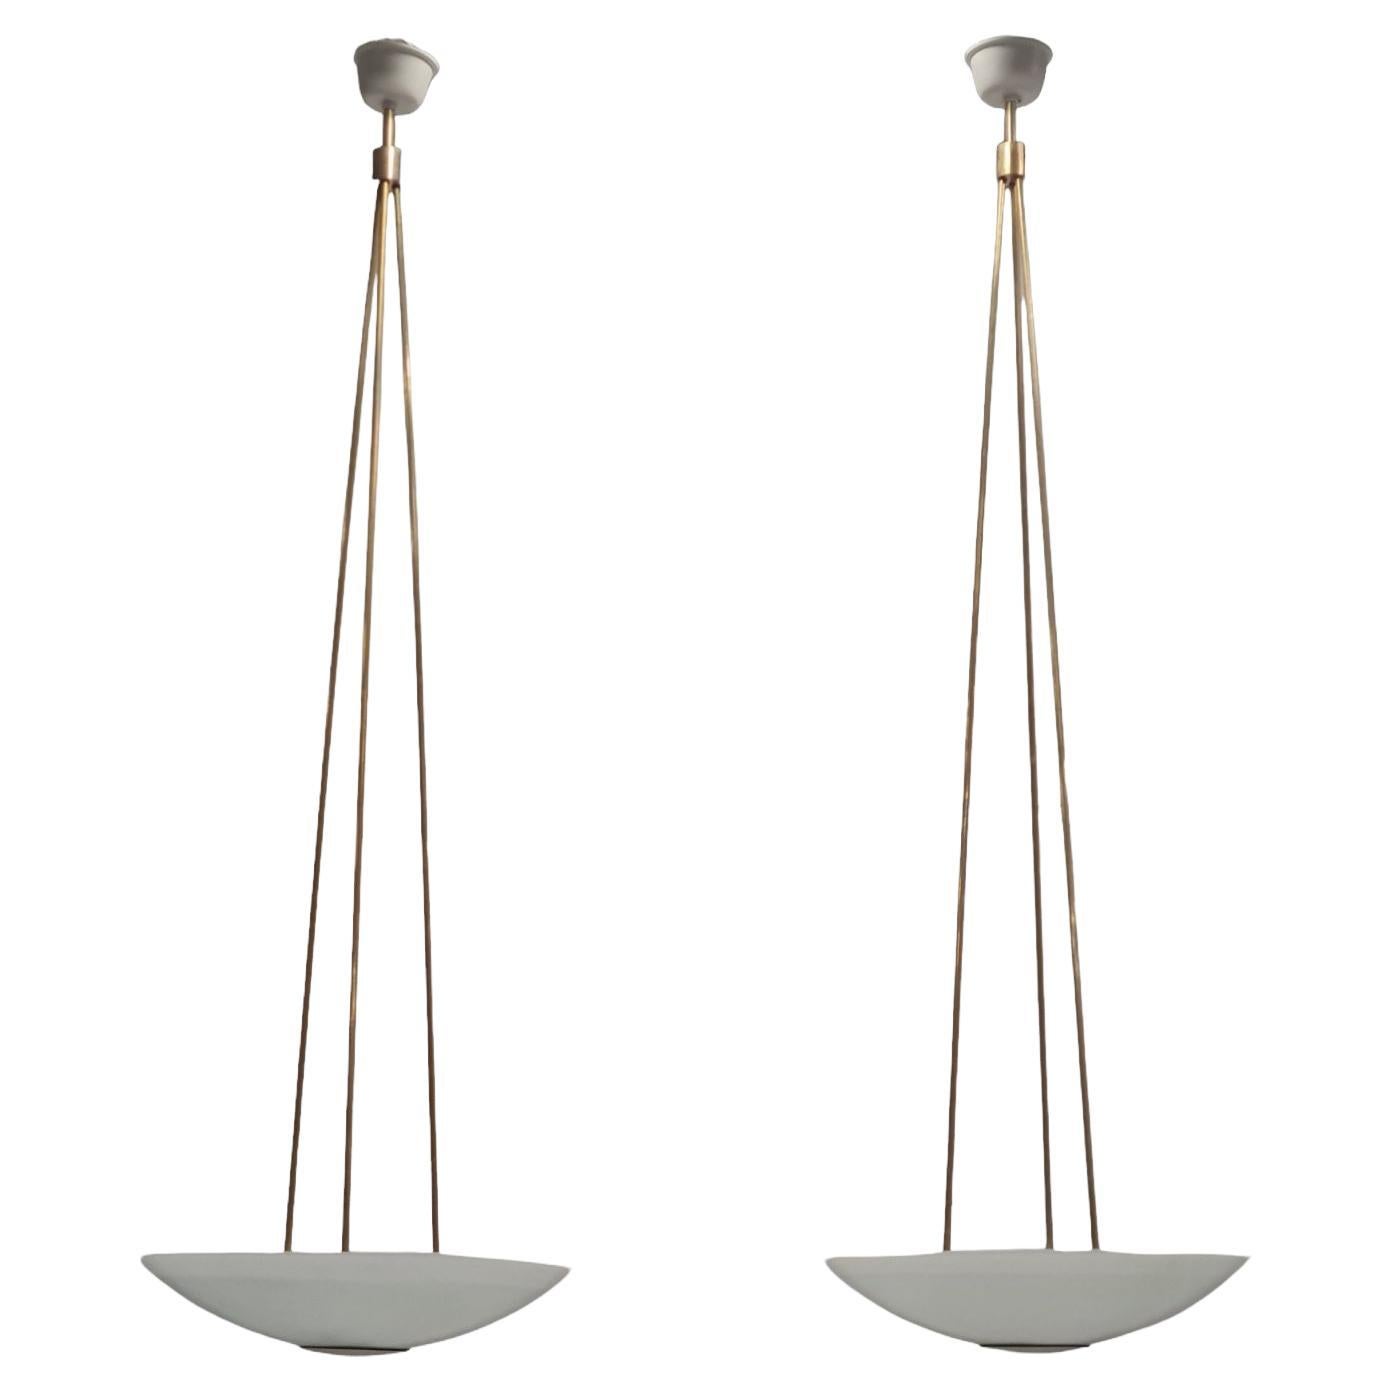 Impressive 2m high Paavo Tynell ceiling lamps, Taito 1940s. For Sale